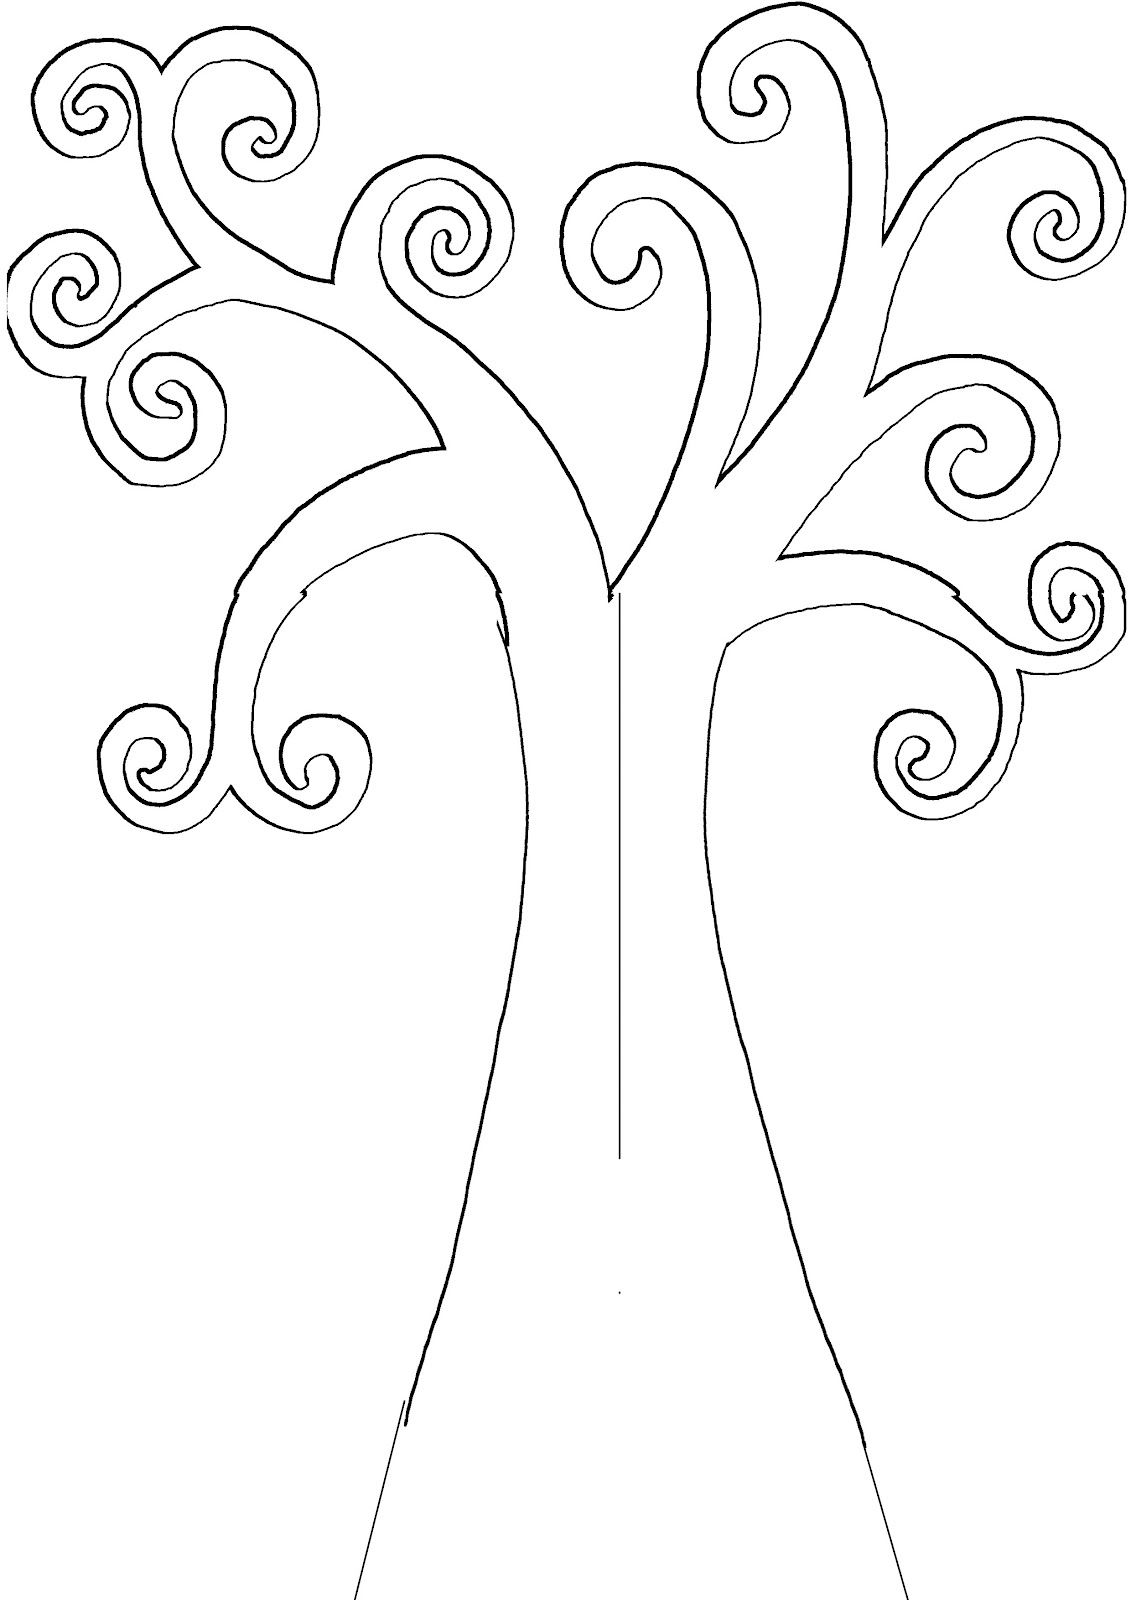 Tree Stencil Printable Family Template For Mac - electronicsbaldcircle